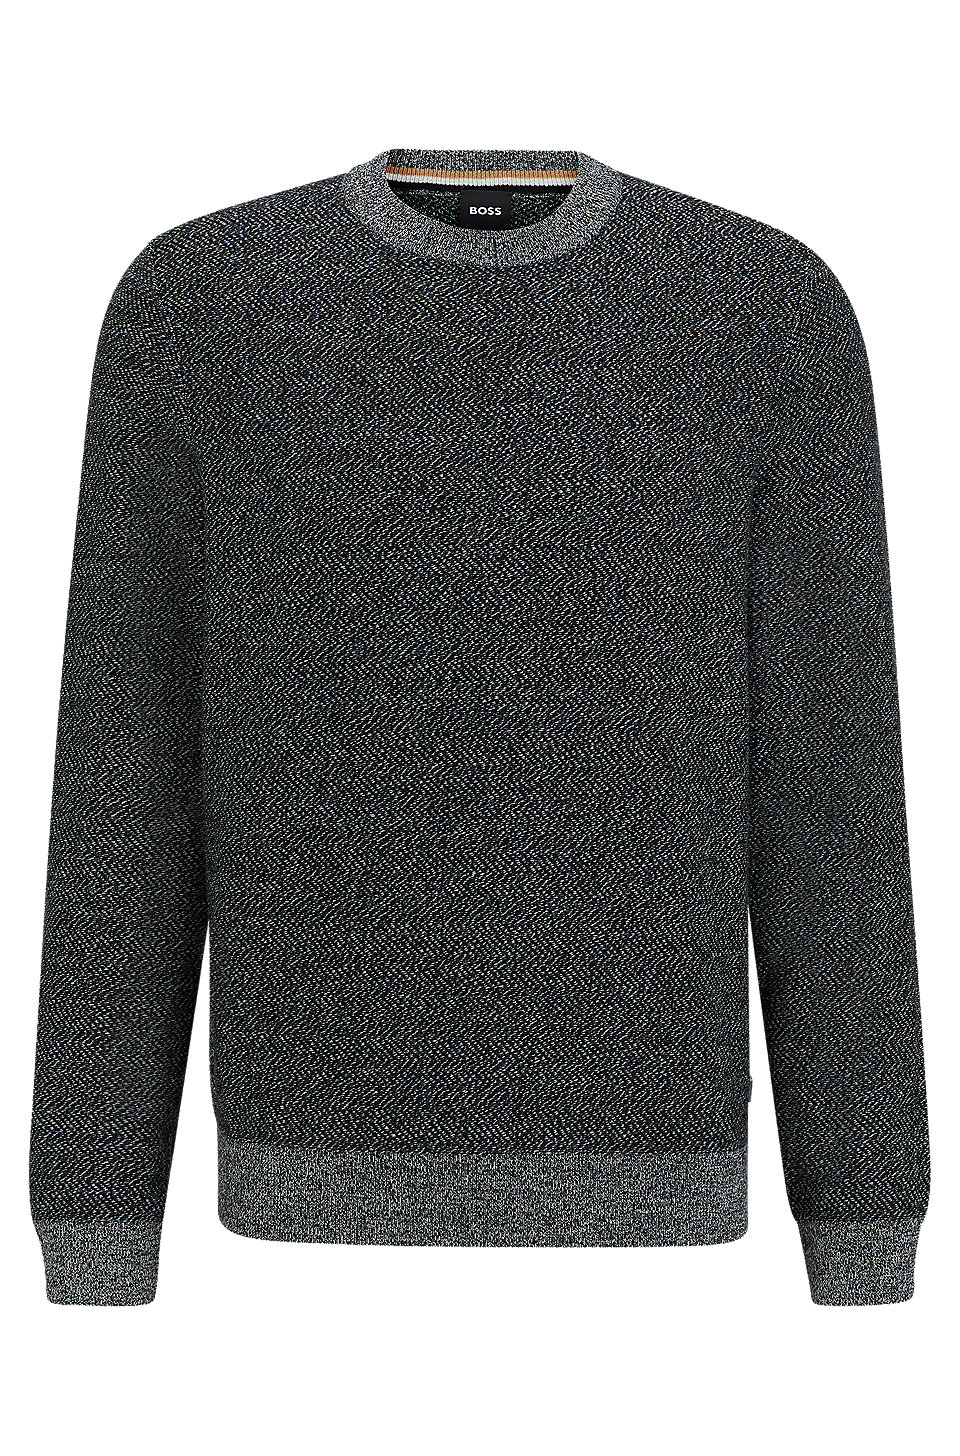 BOSS - Regular-fit sweater with herringbone structure and ribbed cuffs